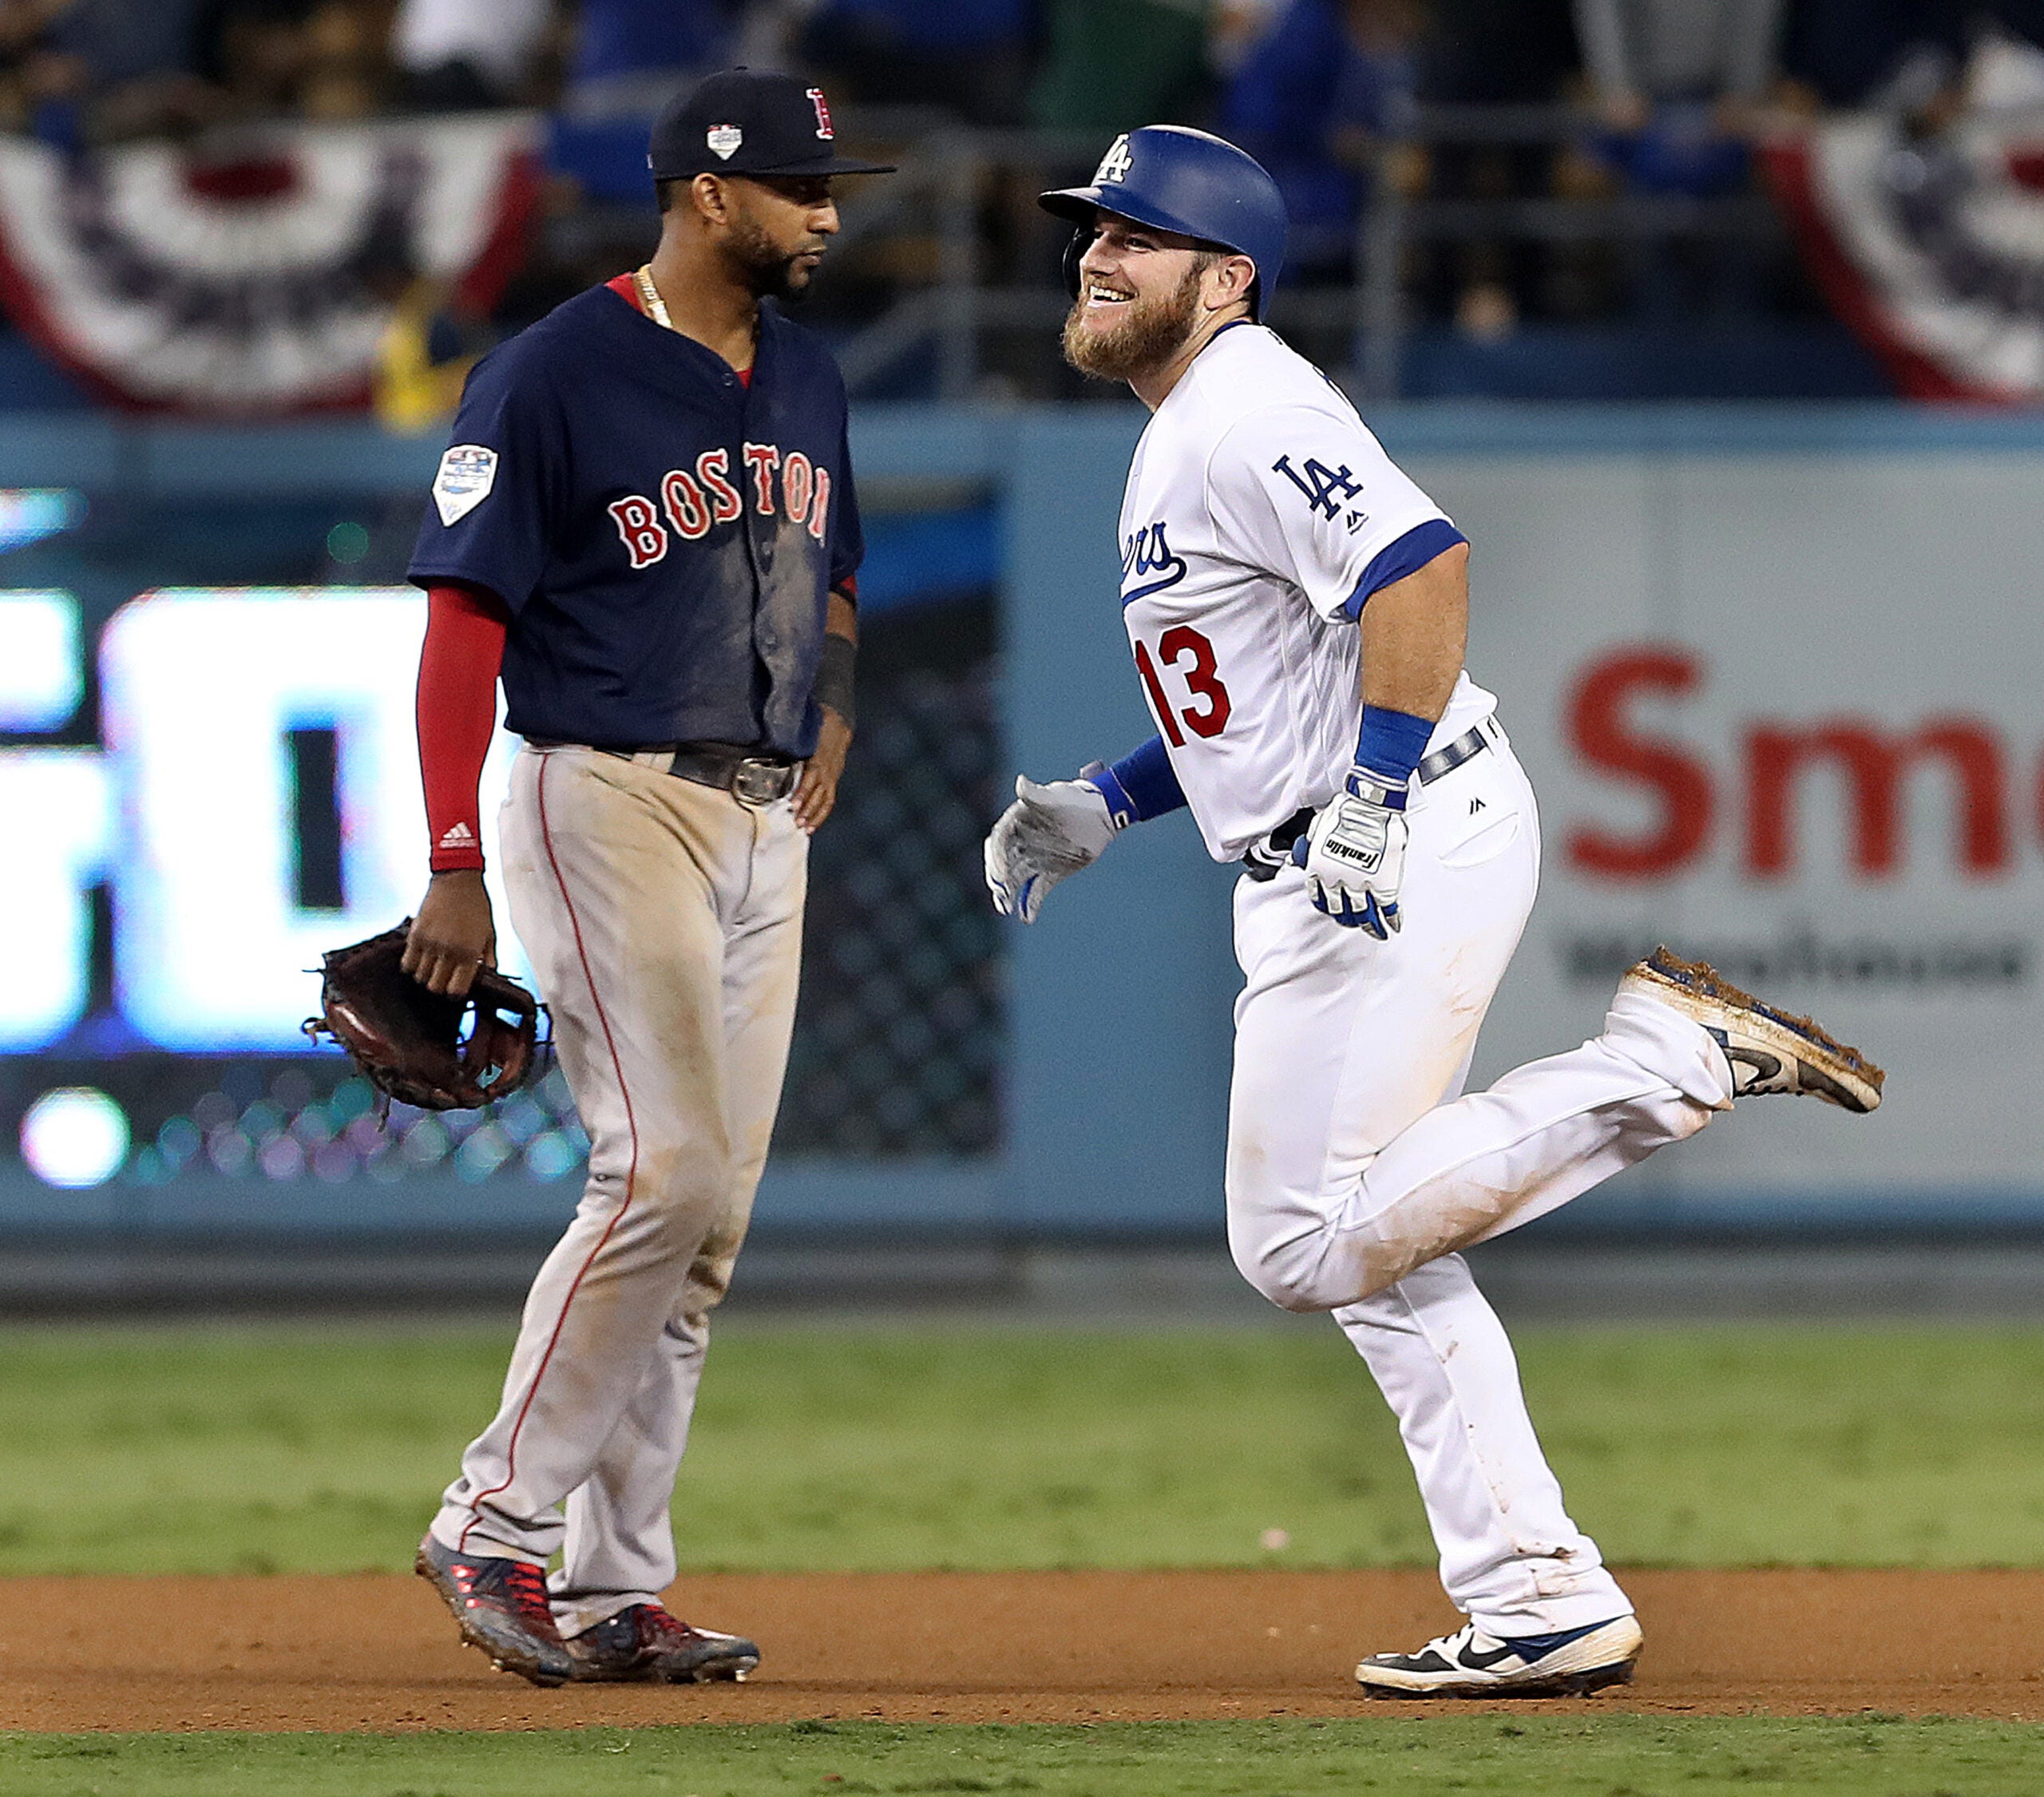 13 mind-boggling stats from the longest World Series game ever